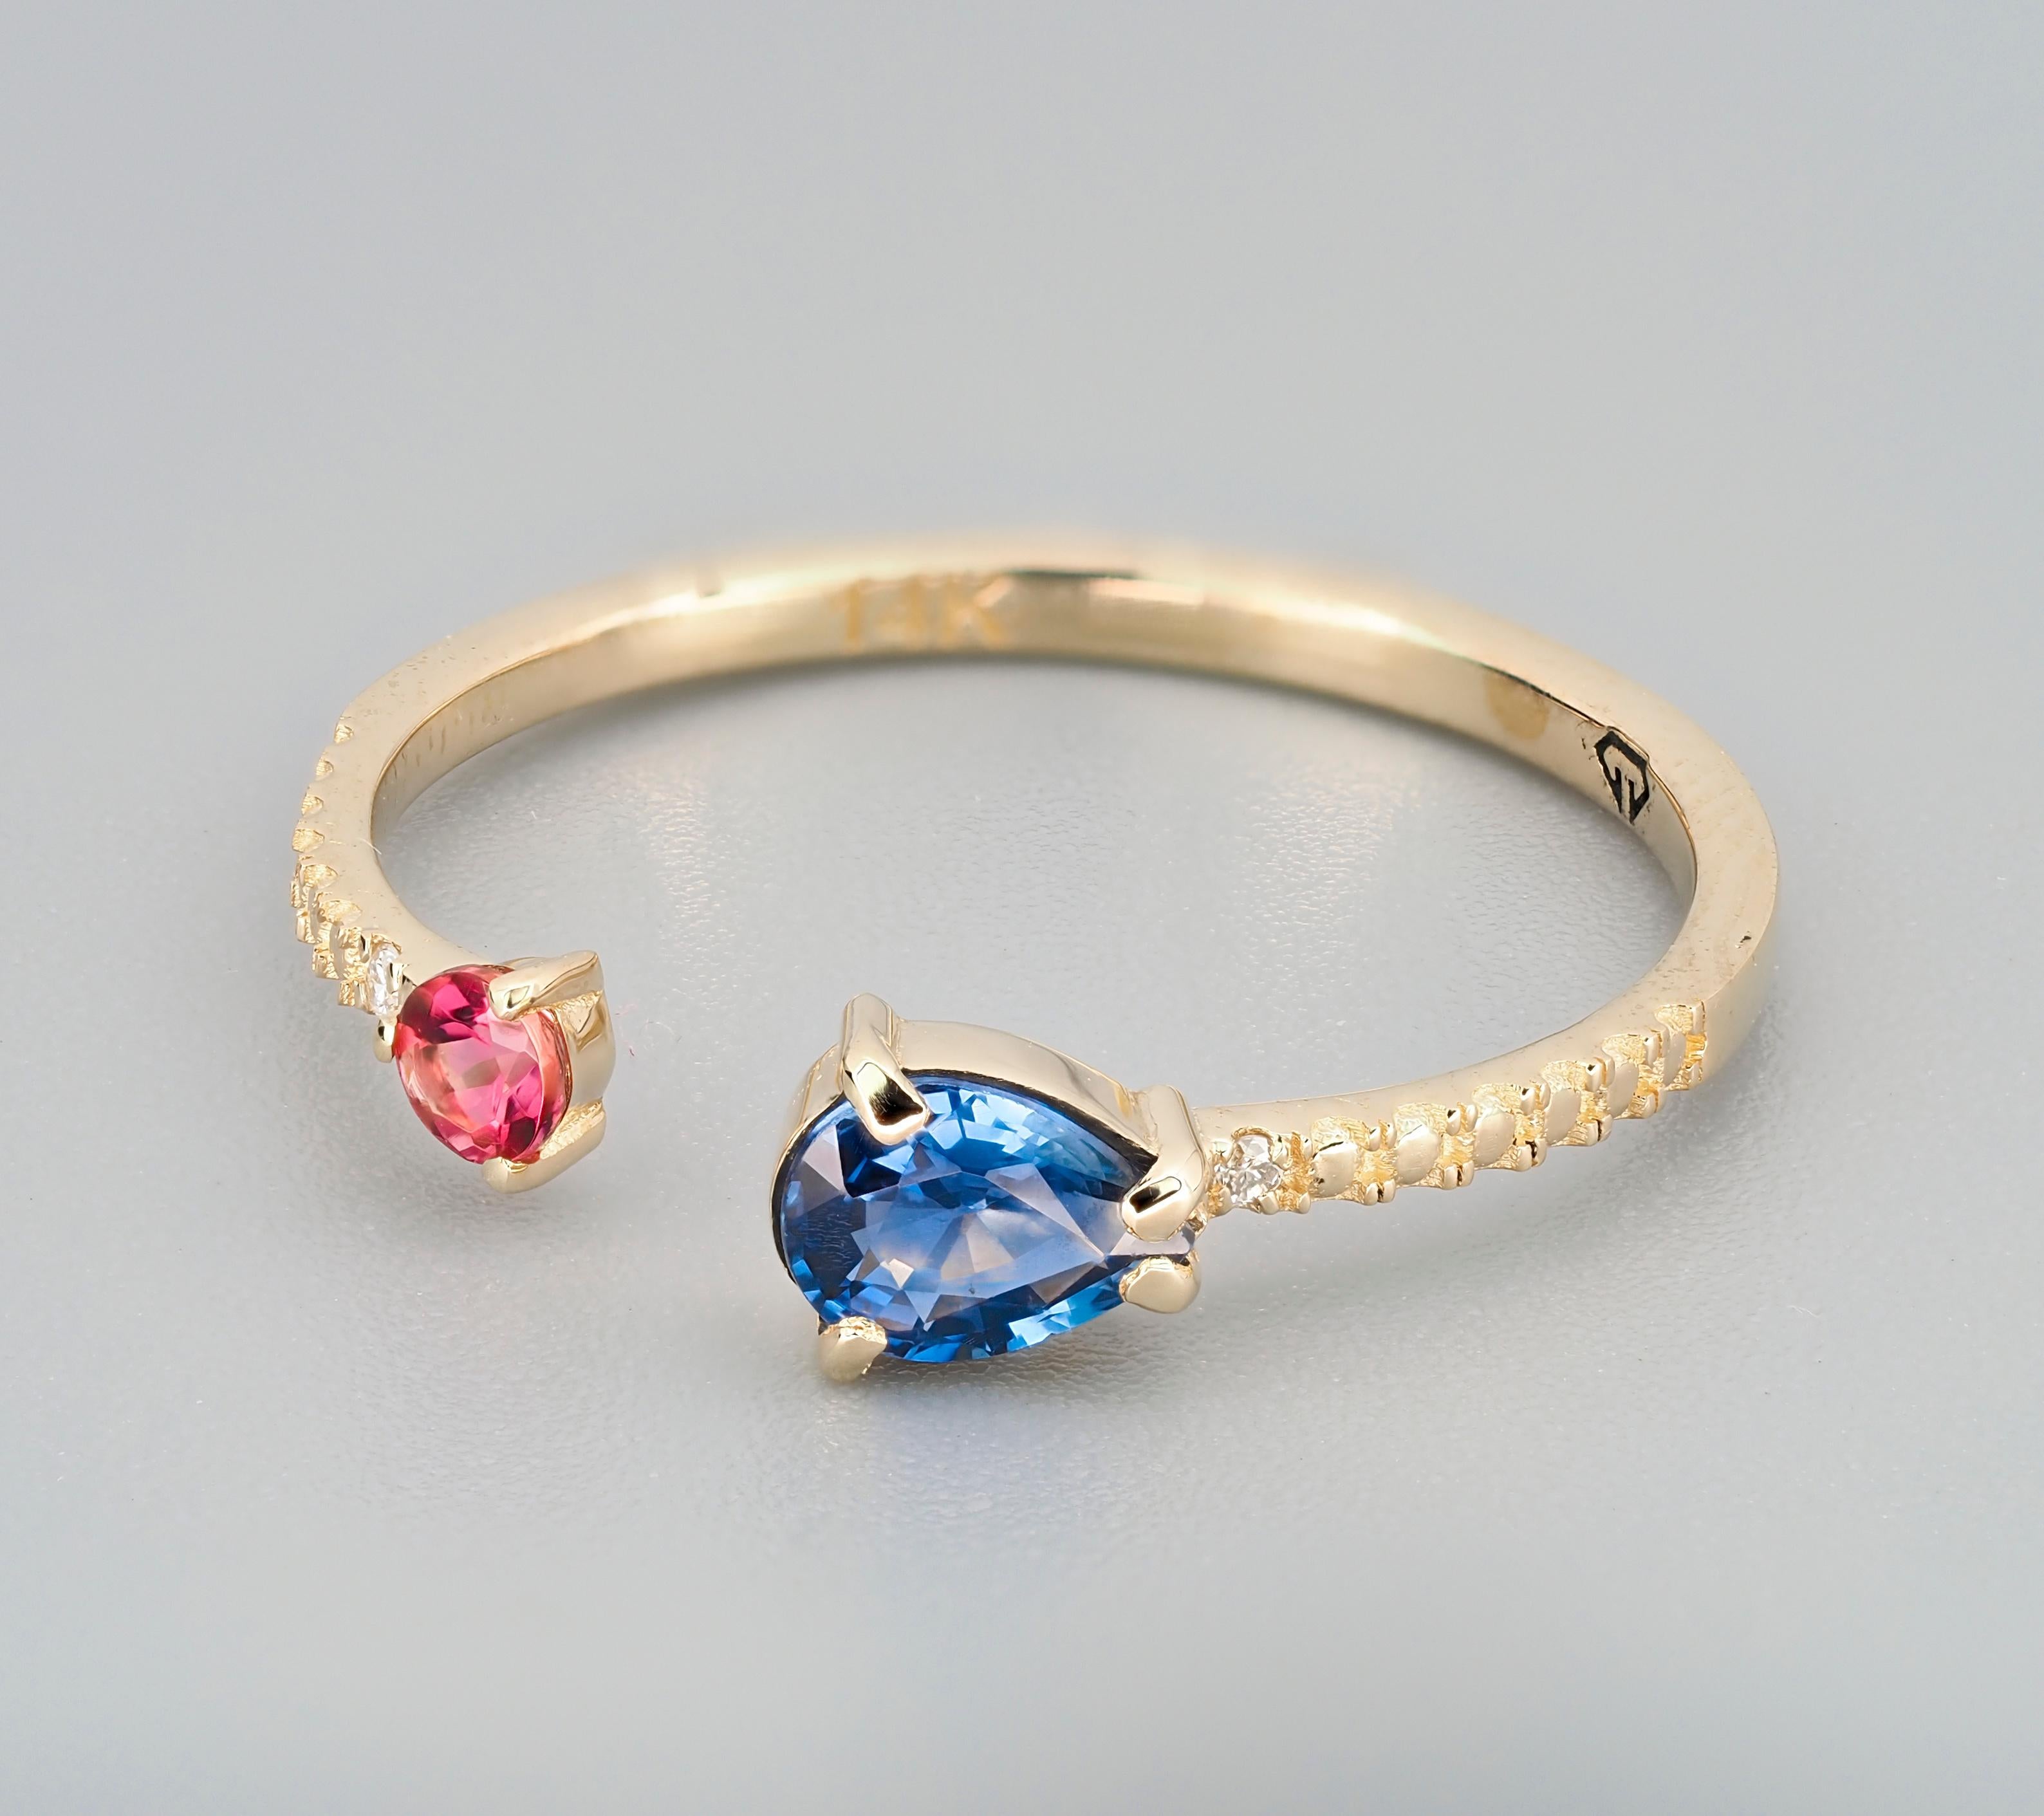 For Sale:  14k Gold Ring with Sapphires and Diamond 5